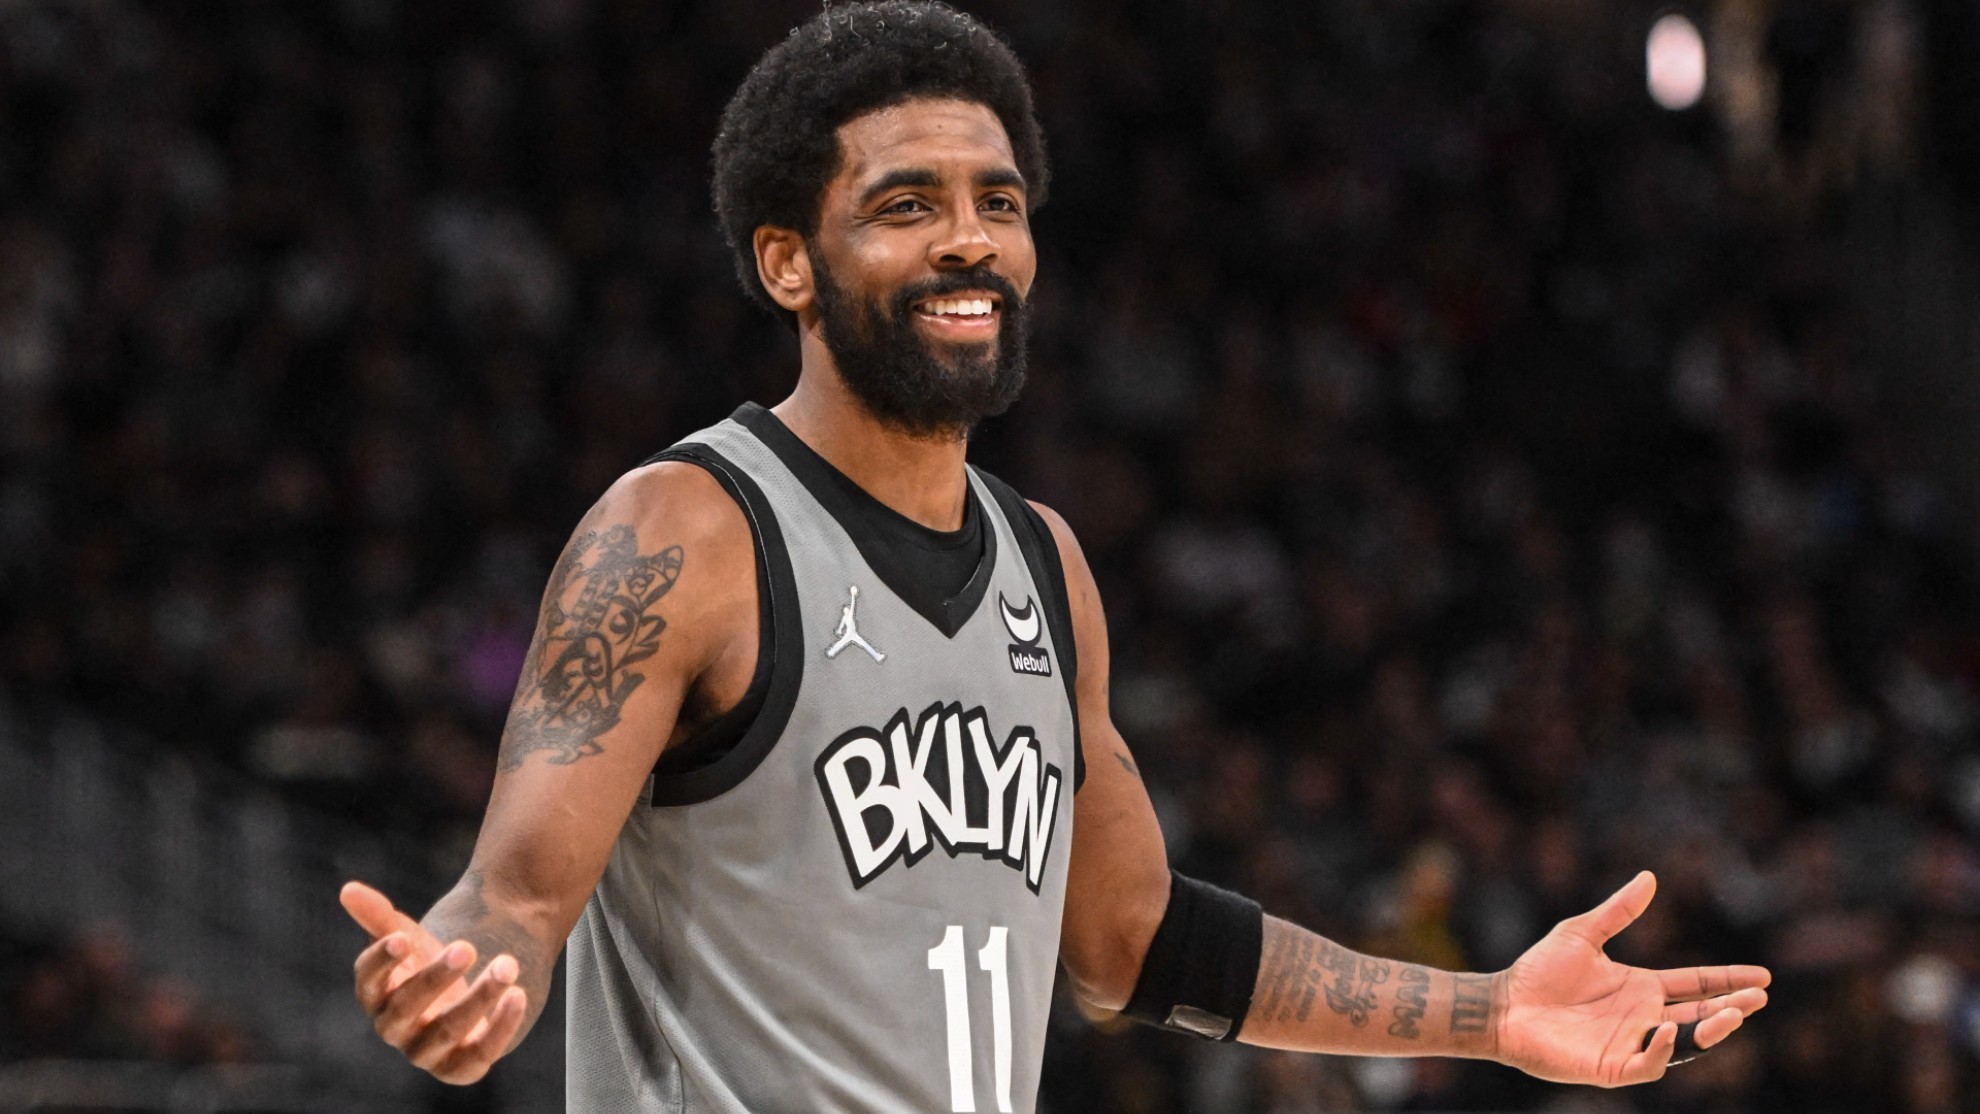 Kyrie Irving, Aaron Judge and other unvaccinated athletes will be able to play...